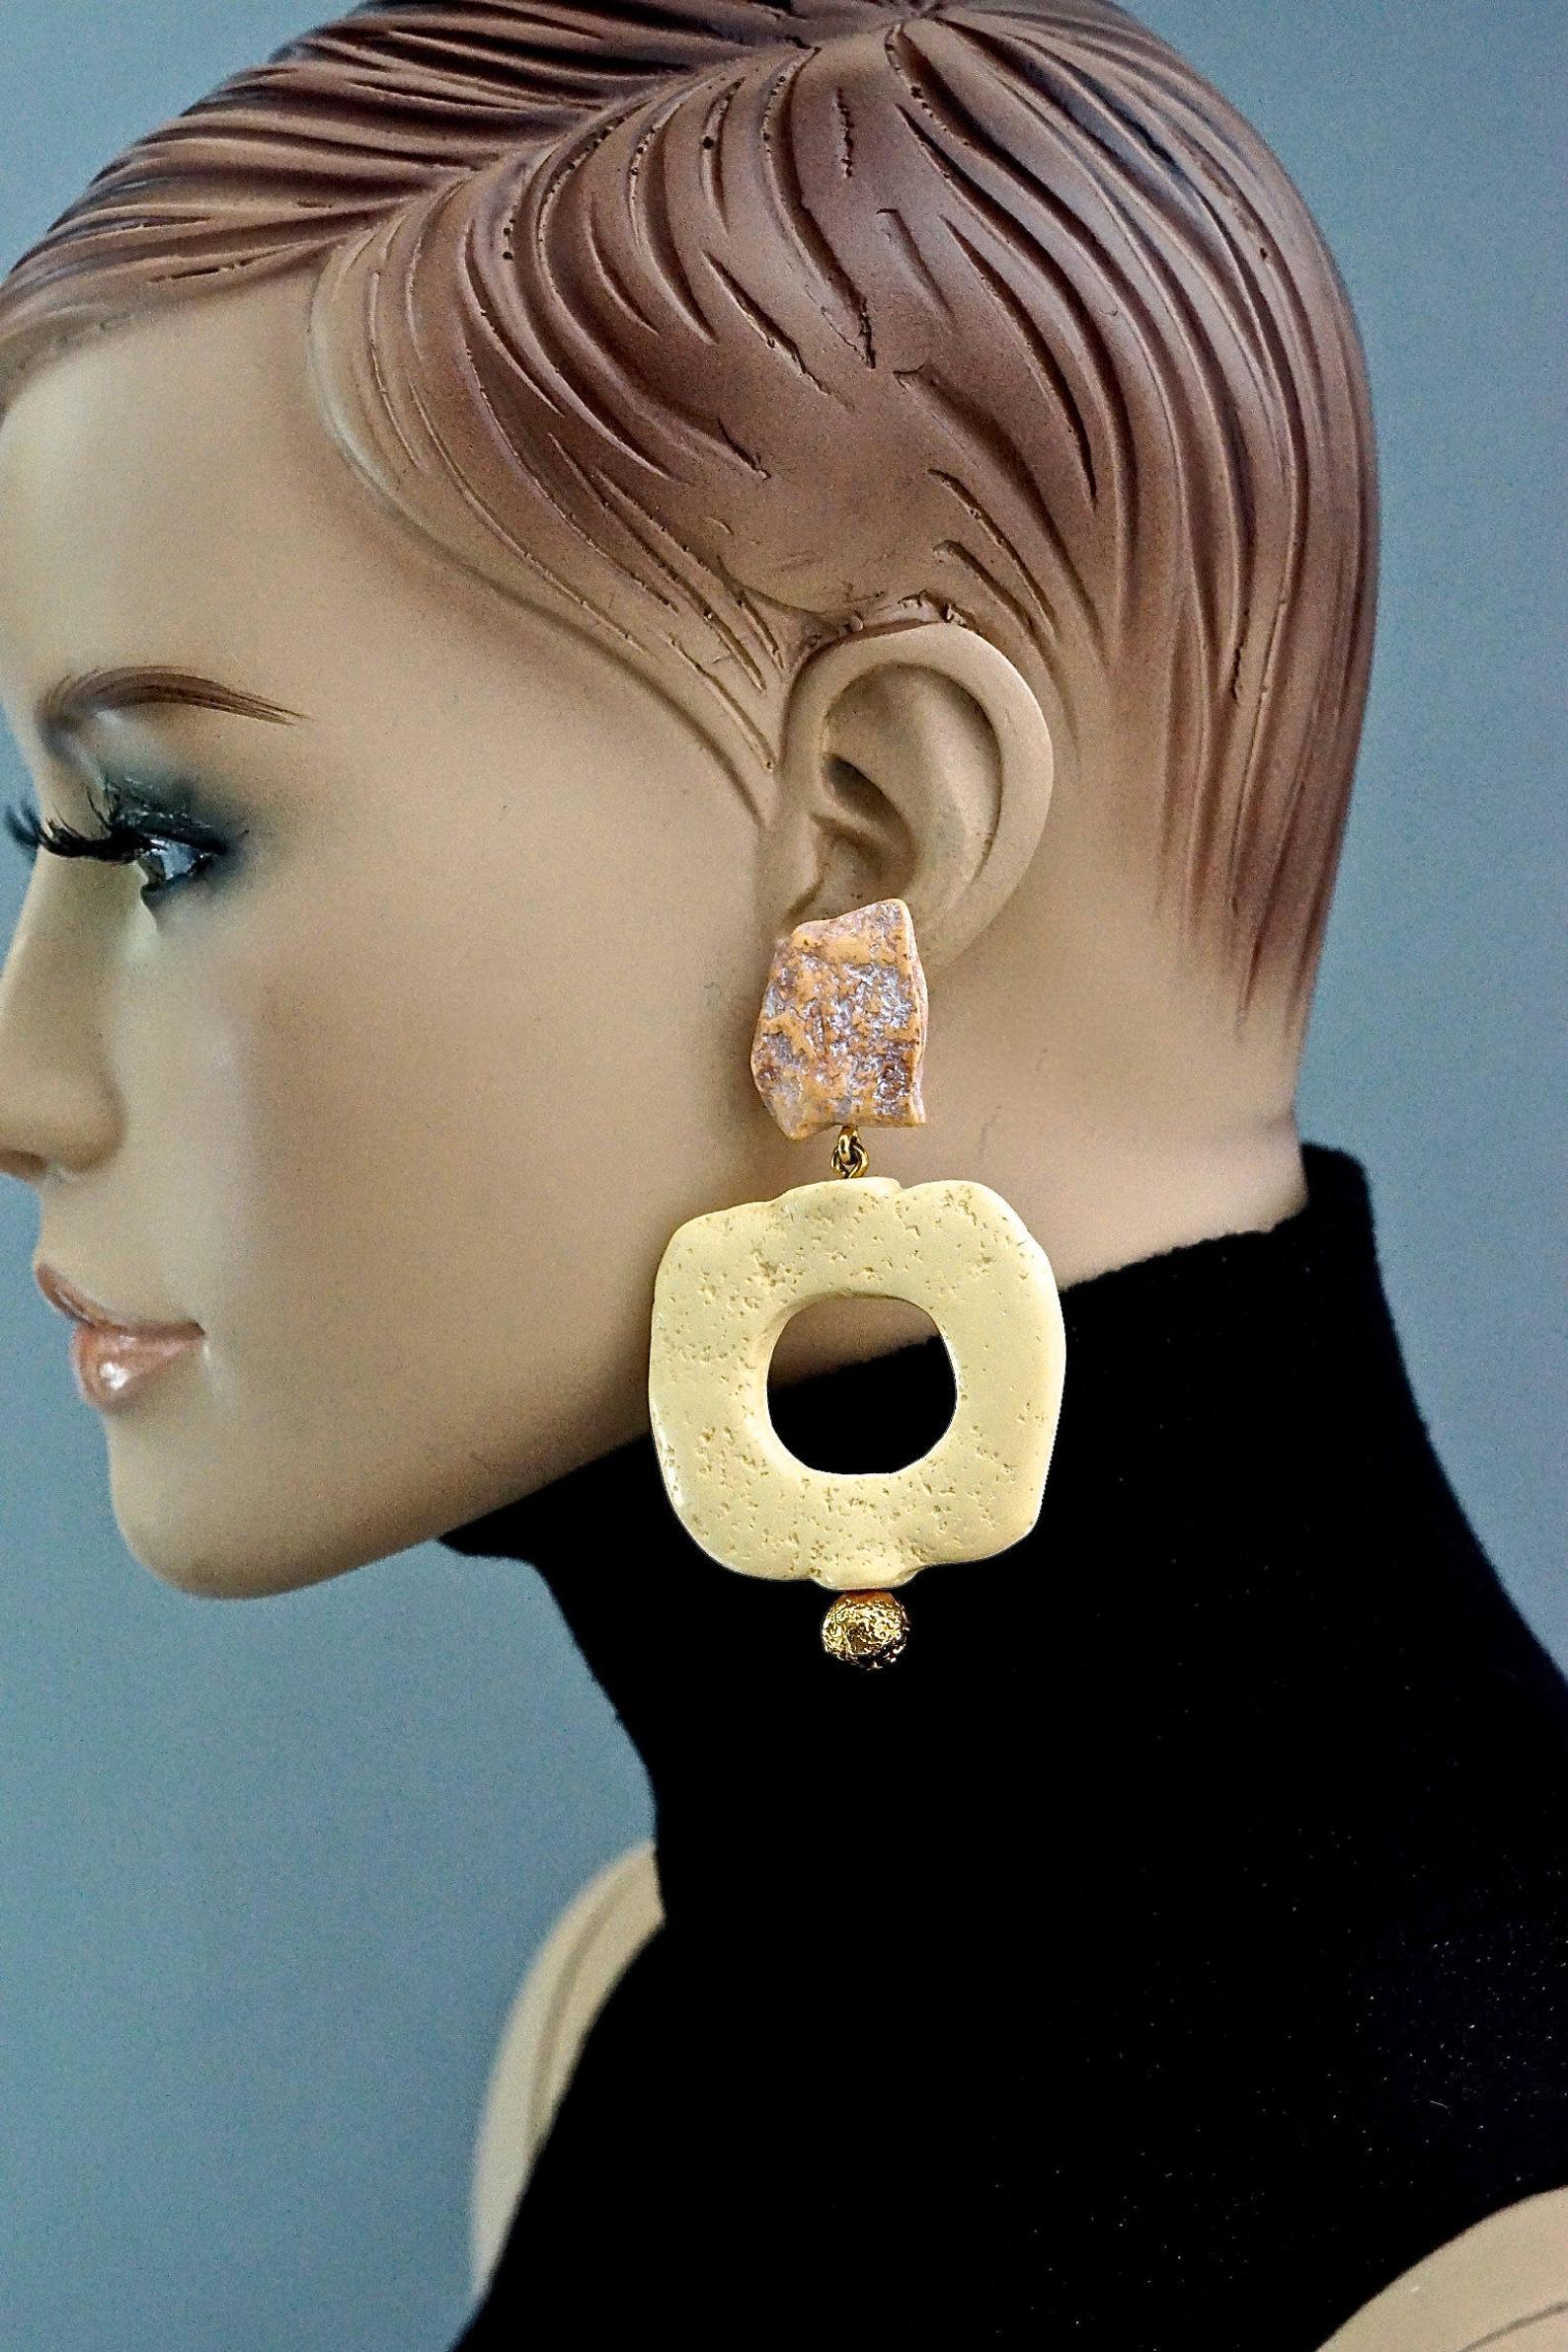 Vintage YVES SAINT LAURENT Ysl Geometric Textured Stone Resin Earrings

Measurements:
Height: 3.46 inches (8.8 cm)
Width: 2.08 inches (5.3 cm)
Weight per Earring: 20 grams

Features:
- 100% authentic YVES SAINT LAURENT.
- Geometric textured resin